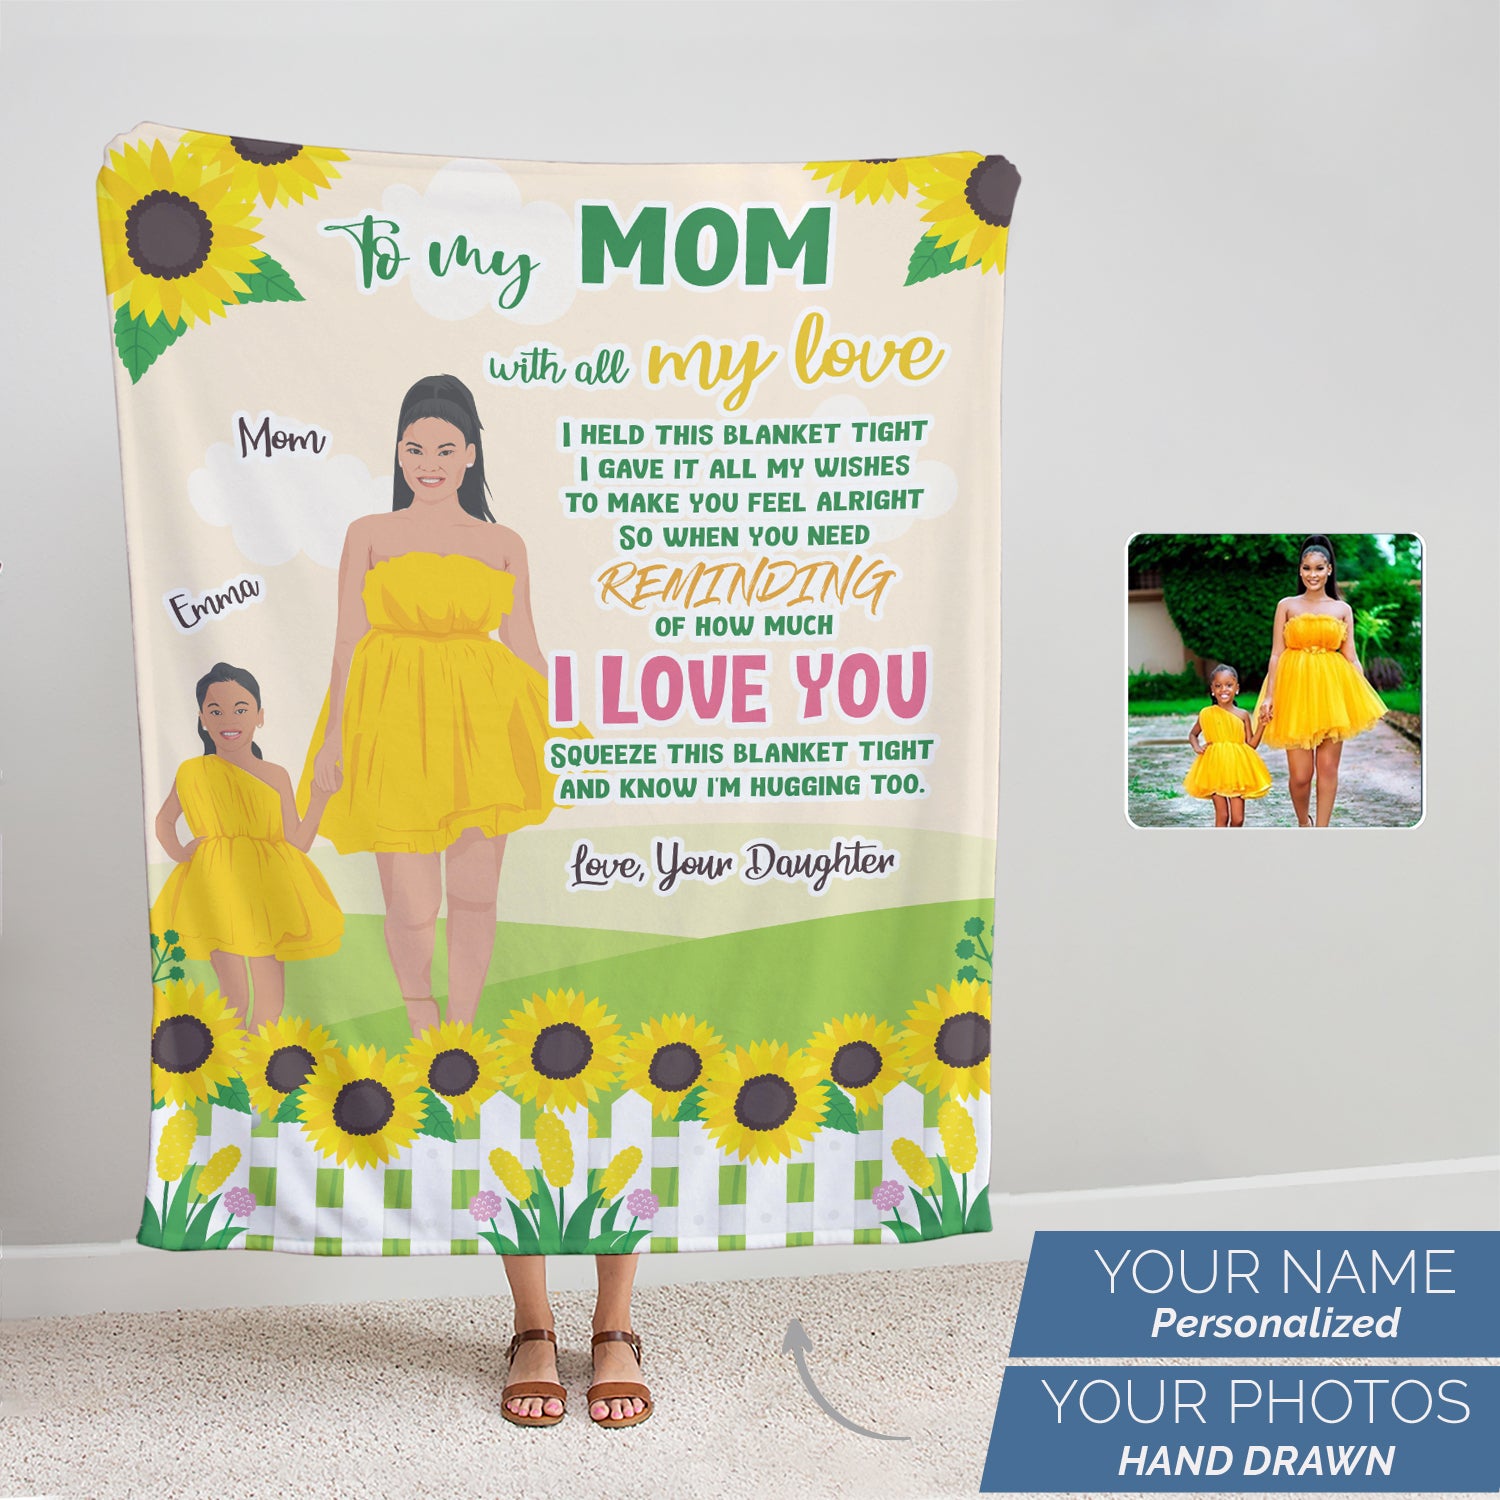 To My Mom poster, Personalized Gift For Mom, From Daughter